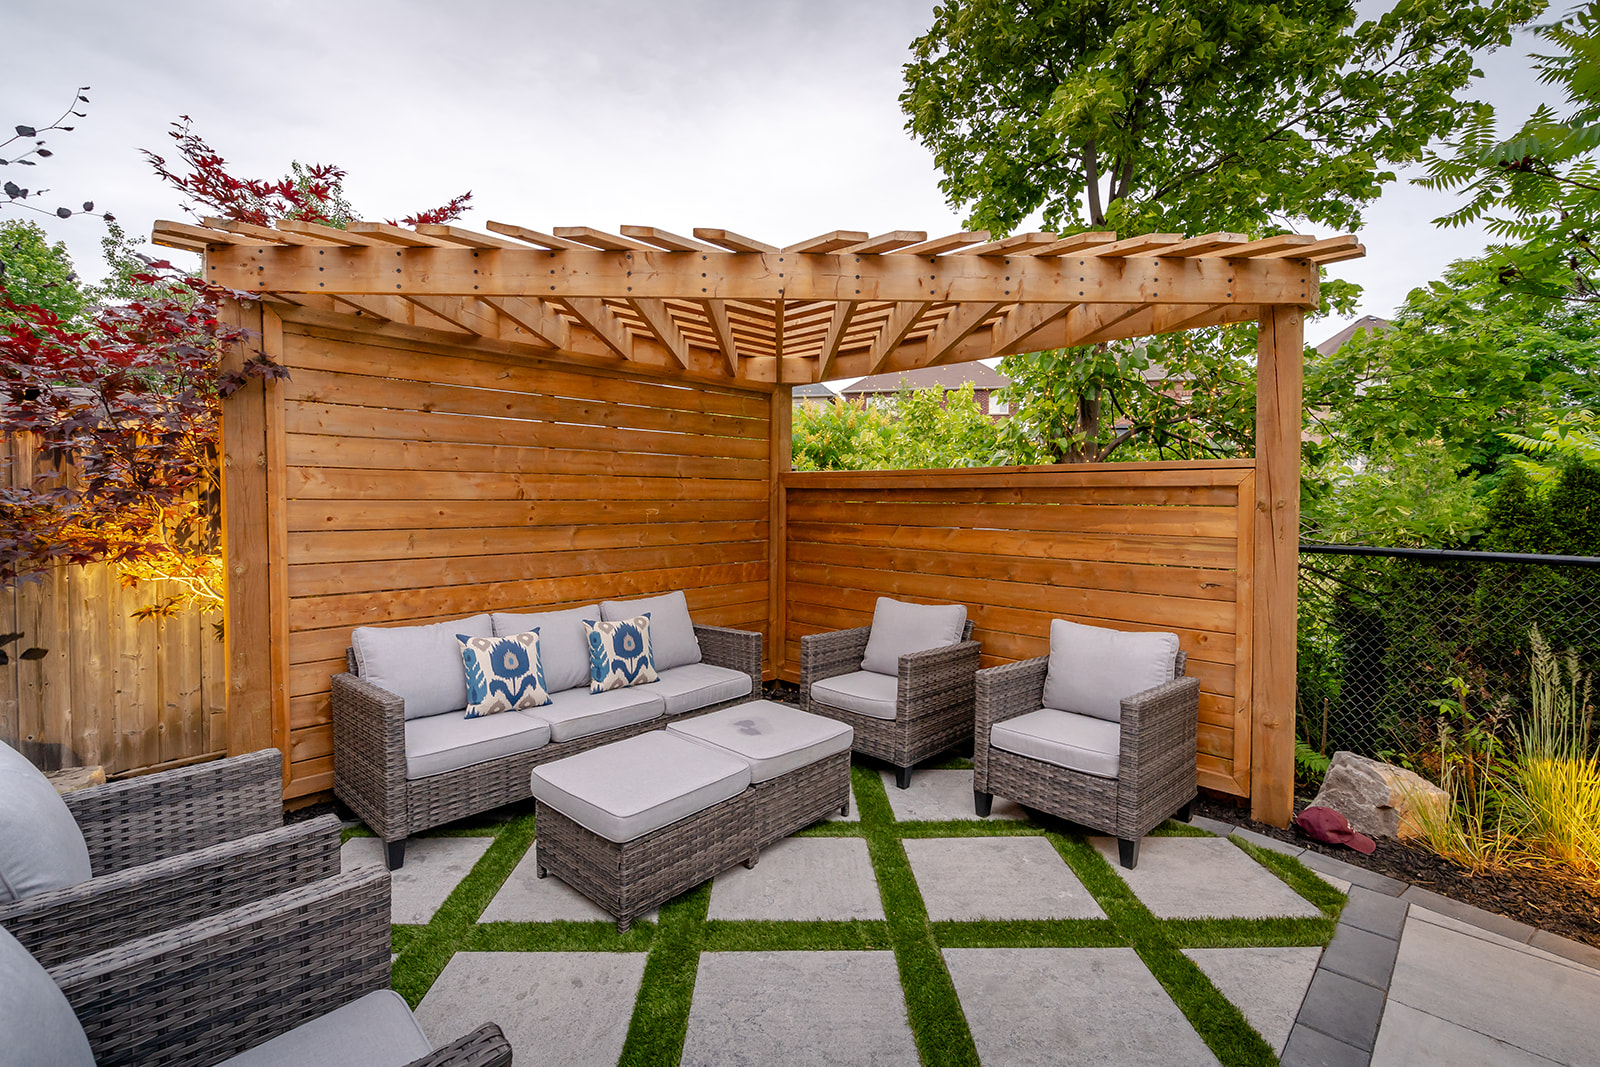 An outdoor patio set on top of patio stones with a wooden canopy overhead.